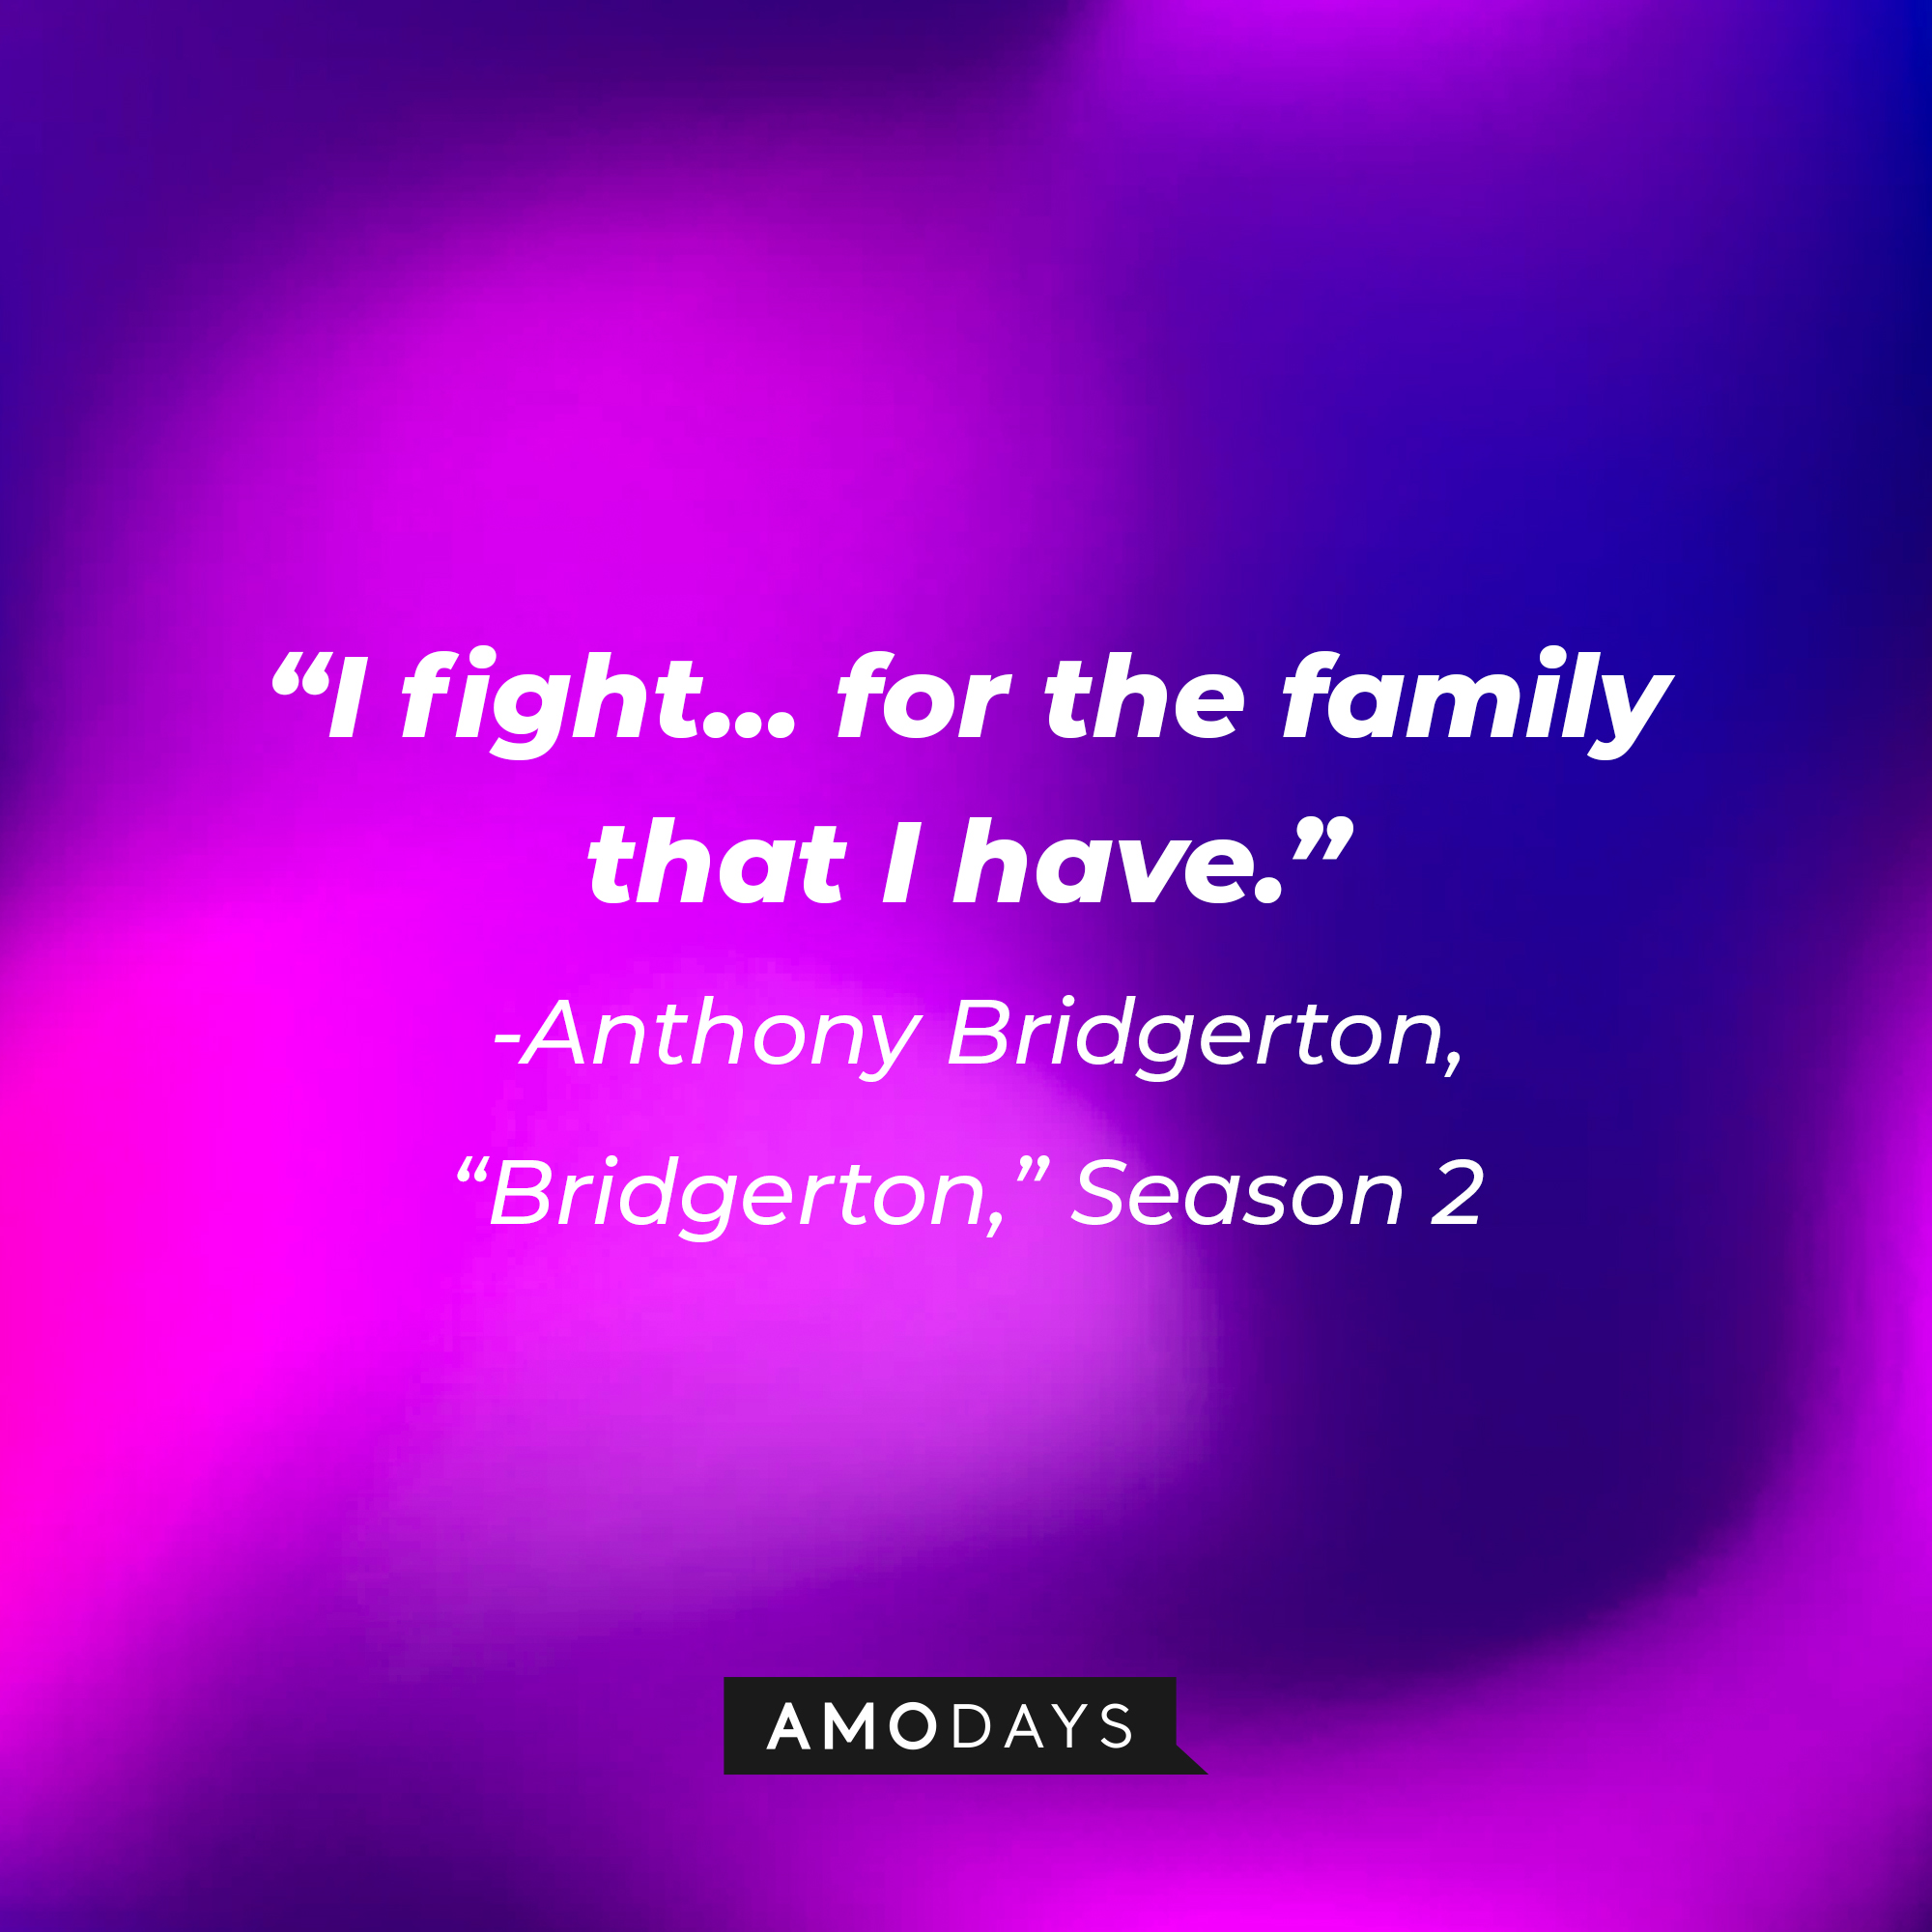 Anthony Bridgerton's quote in Season 2: I fight... for the family that I have." | Source: AmoDays